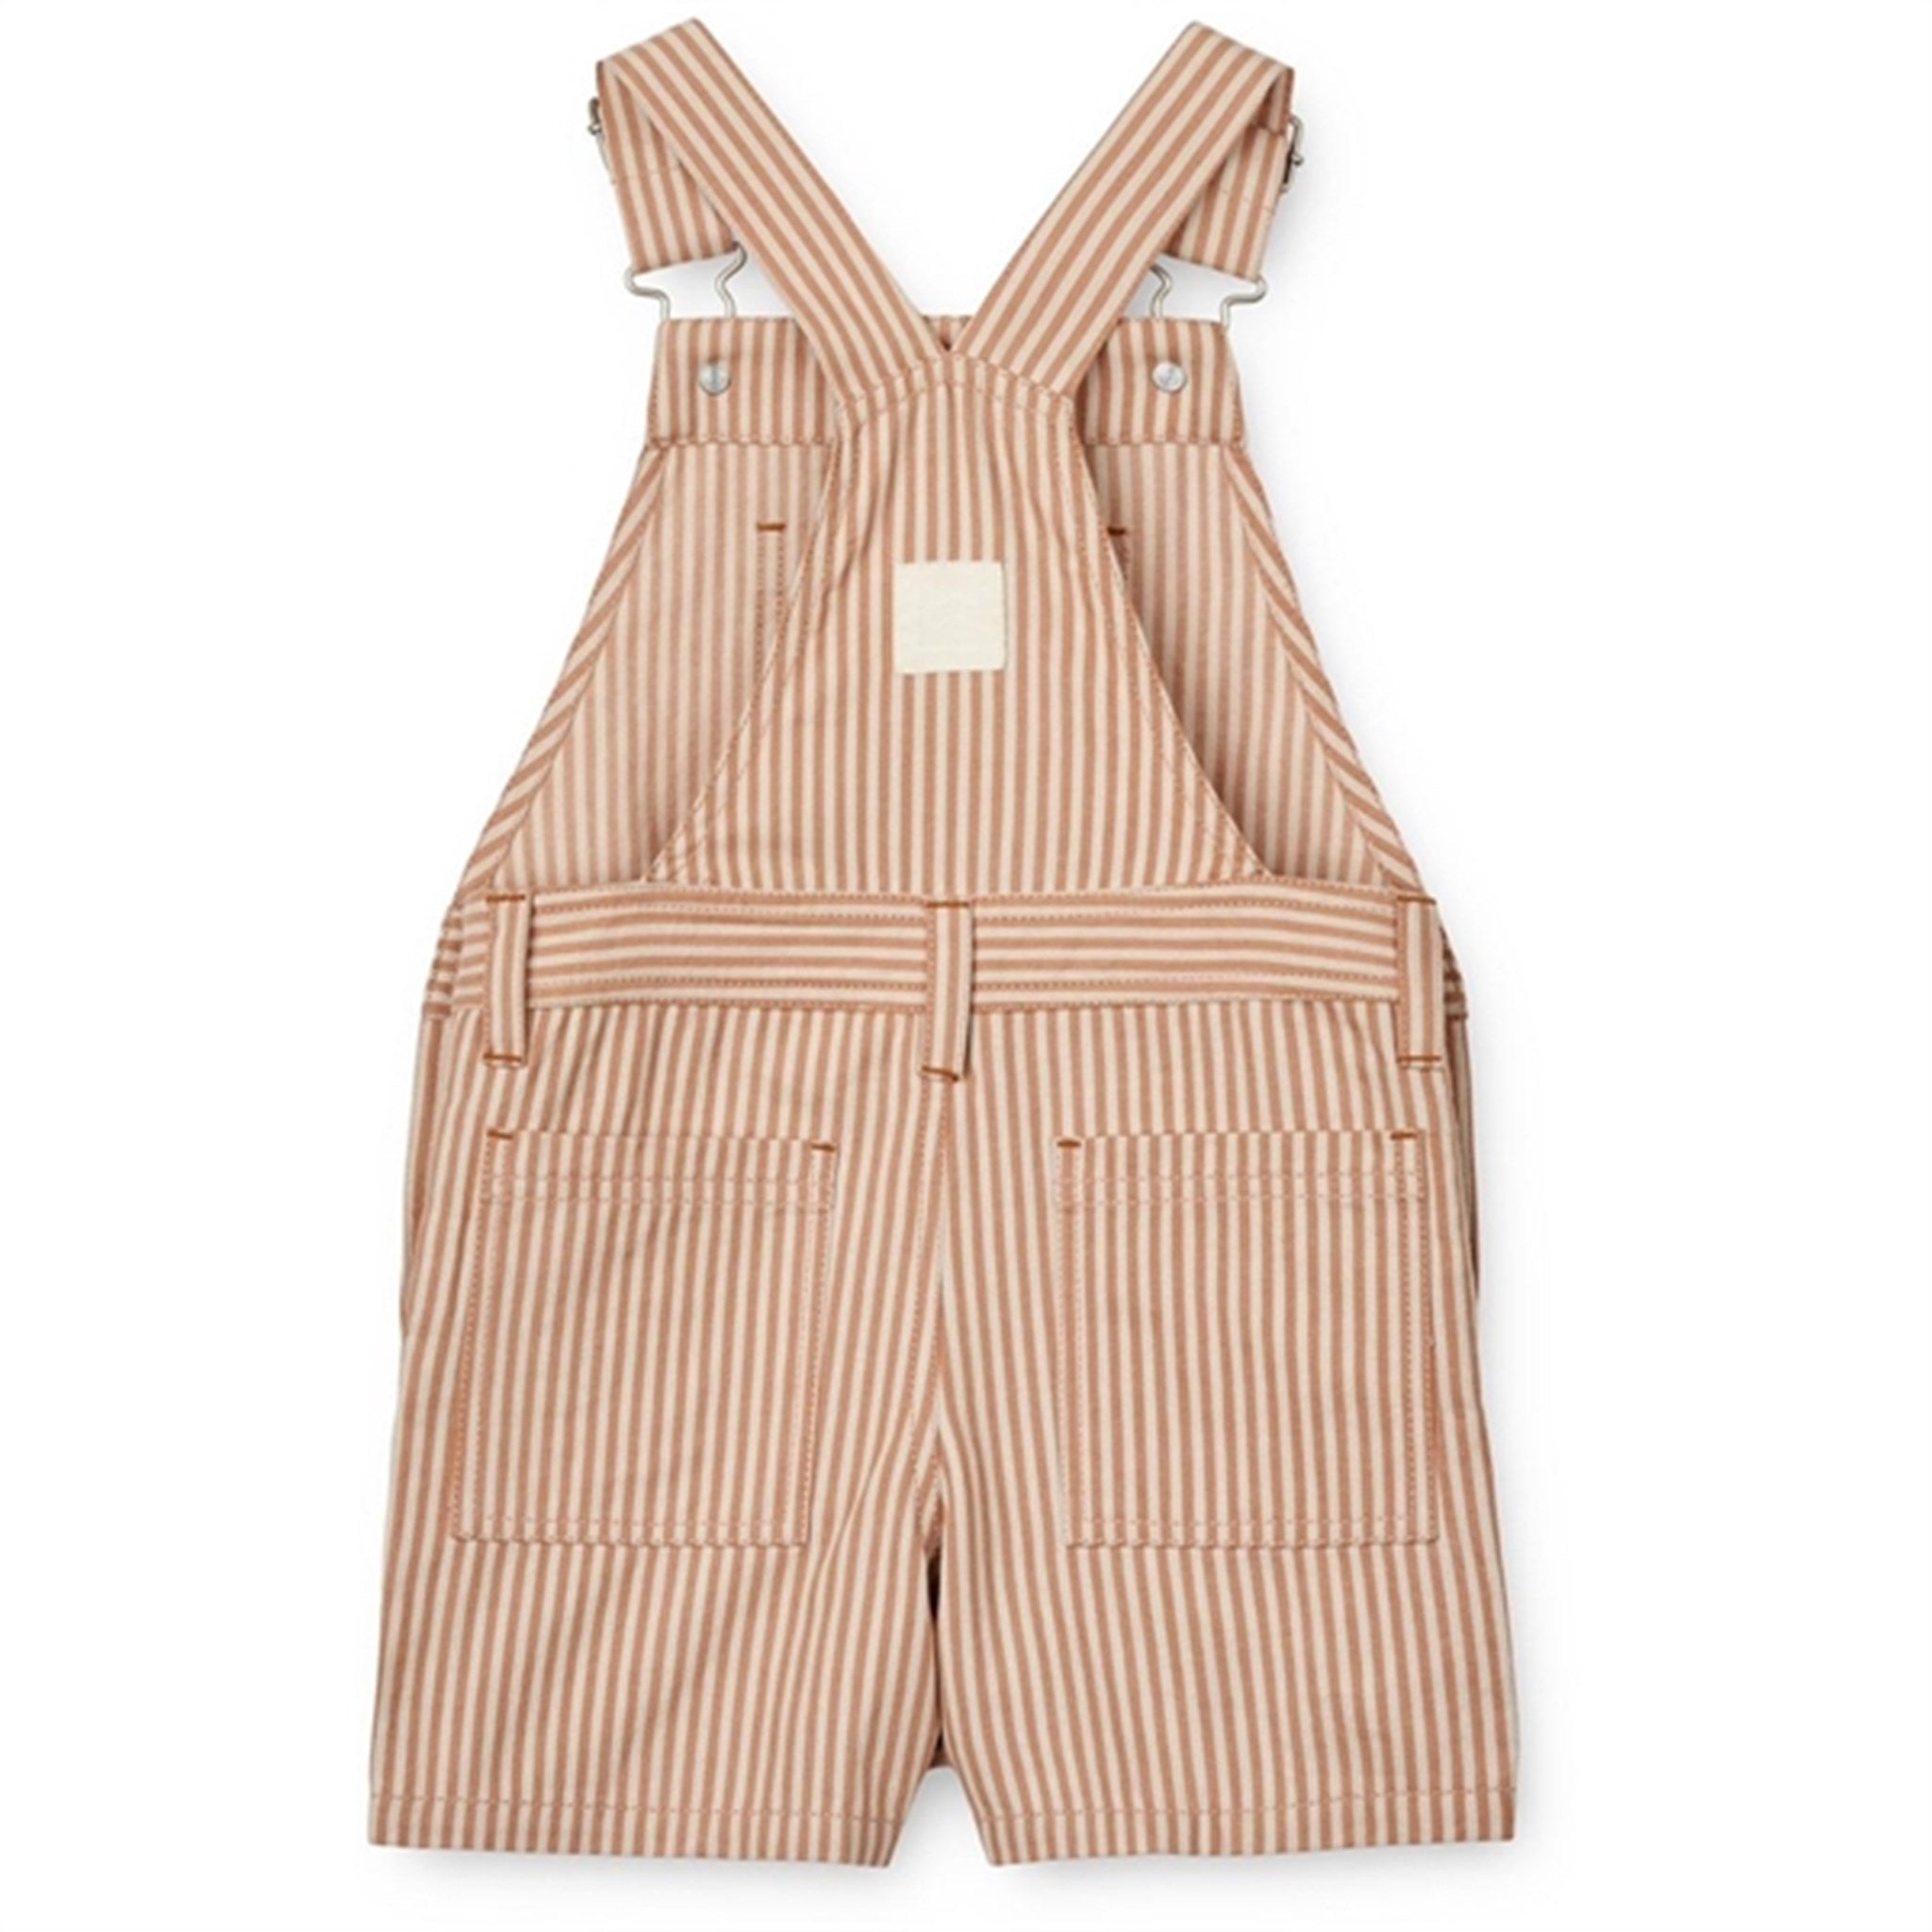 Liewood Y/D Stripe Tuscany Rose/Sandy Venedict Stripe Overall 2